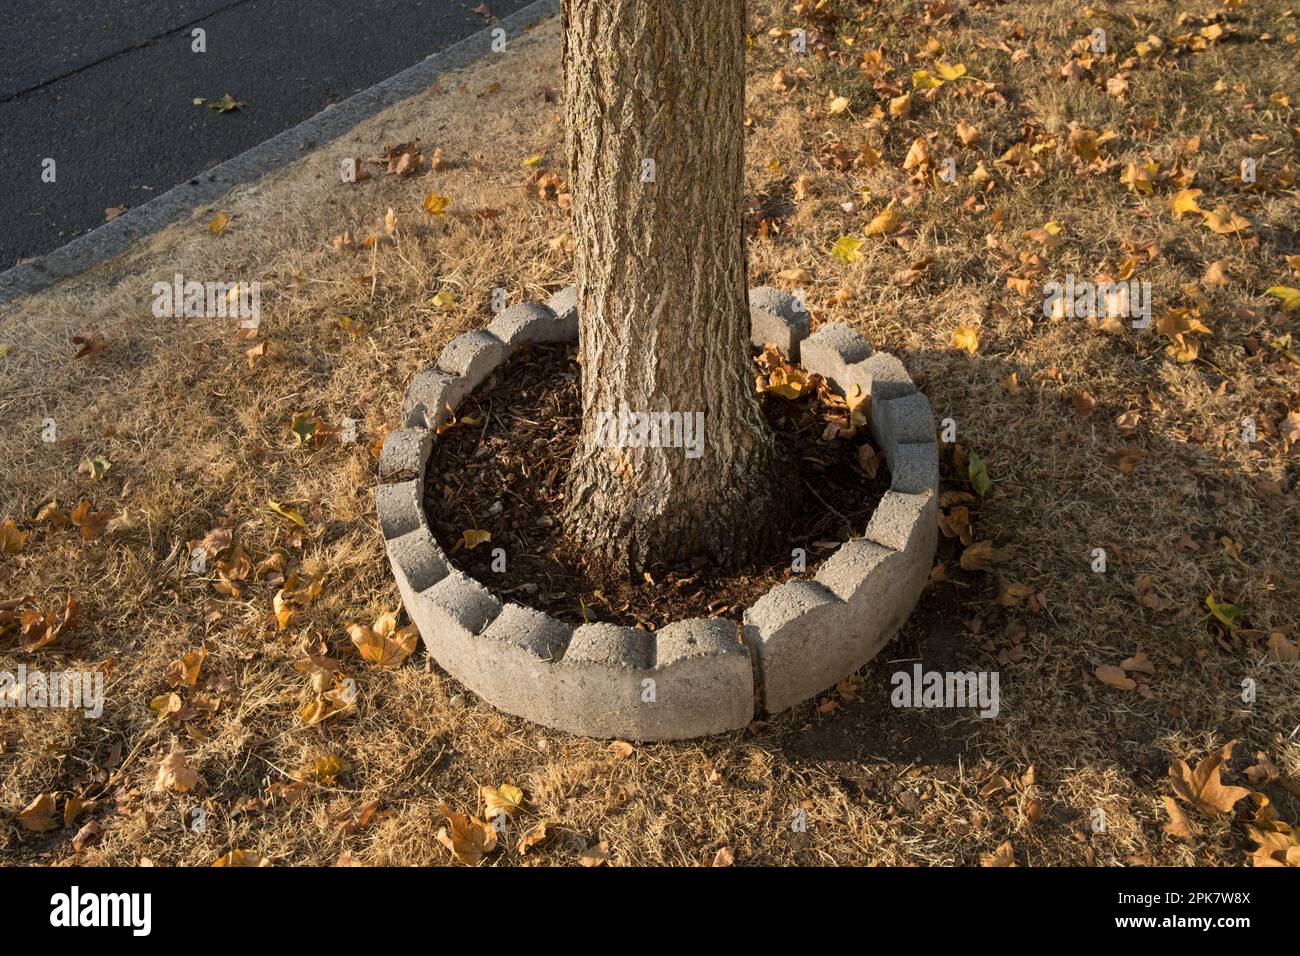 A small urban tree planted in earth, surrounded my concrete barrier. Stock Photo